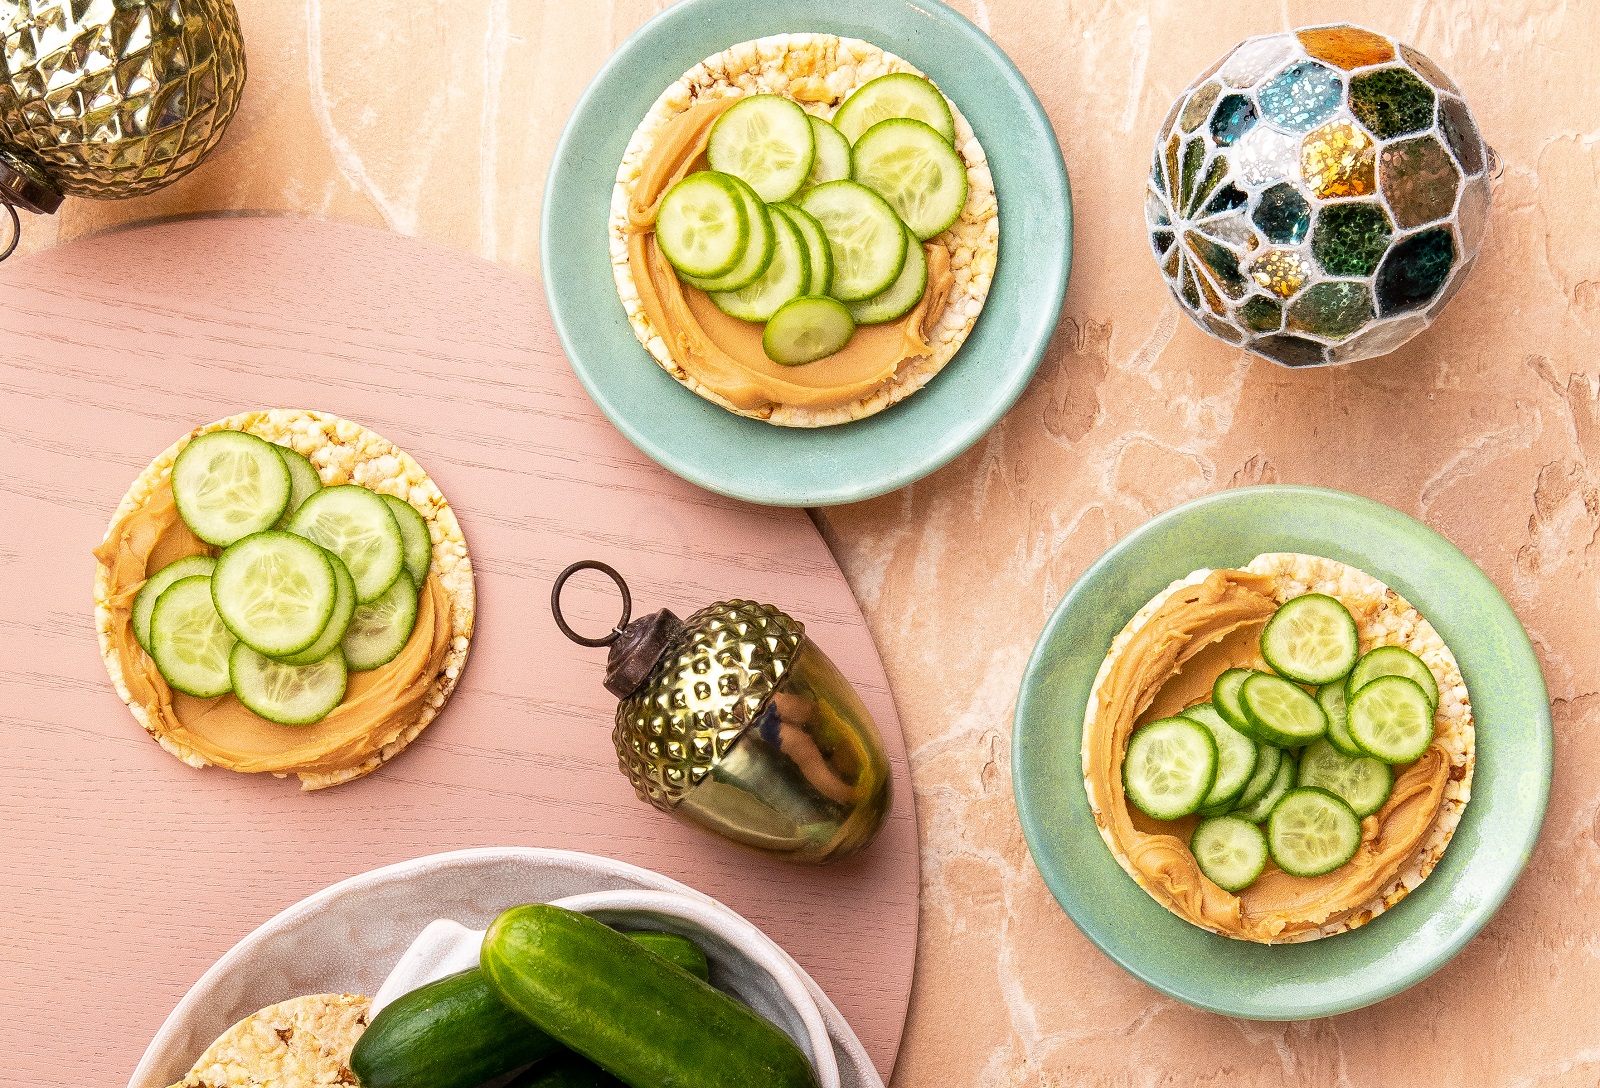 Peanut Butter & Cucumber on CORN THINS slices